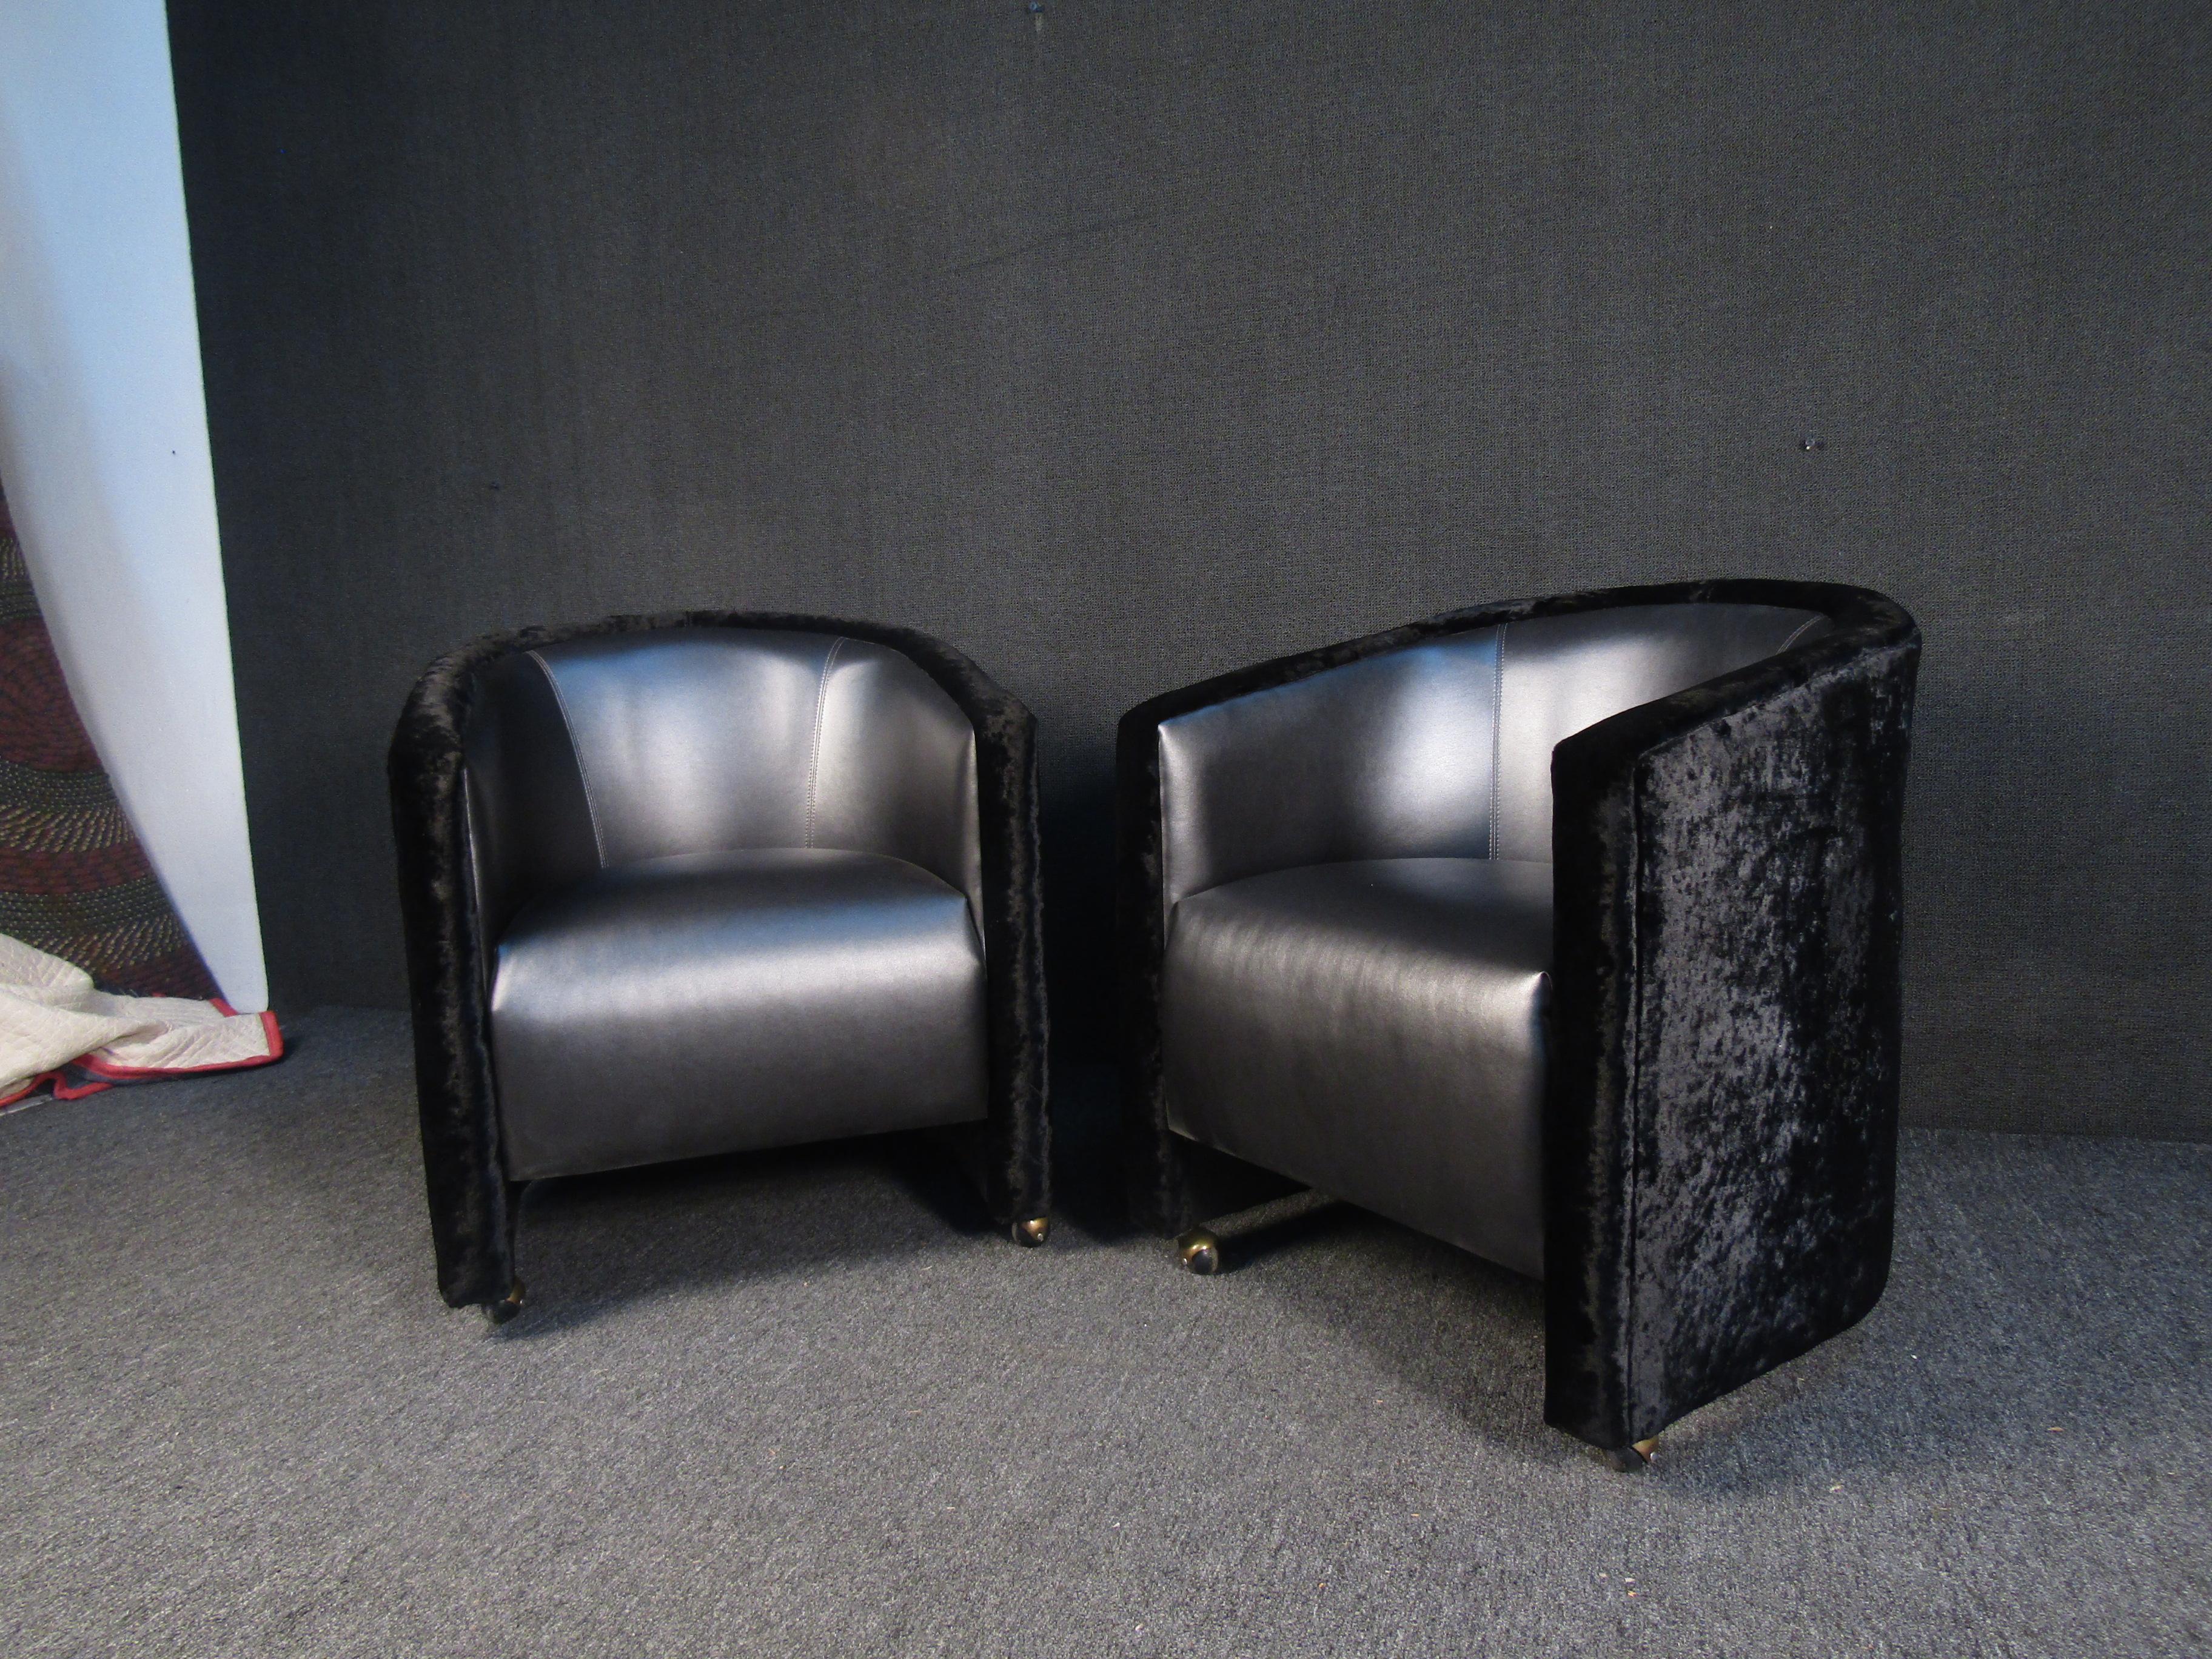 A striking pair of rolling club chairs with contrasting vinyl and velvet upholstery, perfect for any bar room or club. Made by Carson Hospitality. Please confirm item location with seller (NY/NJ).